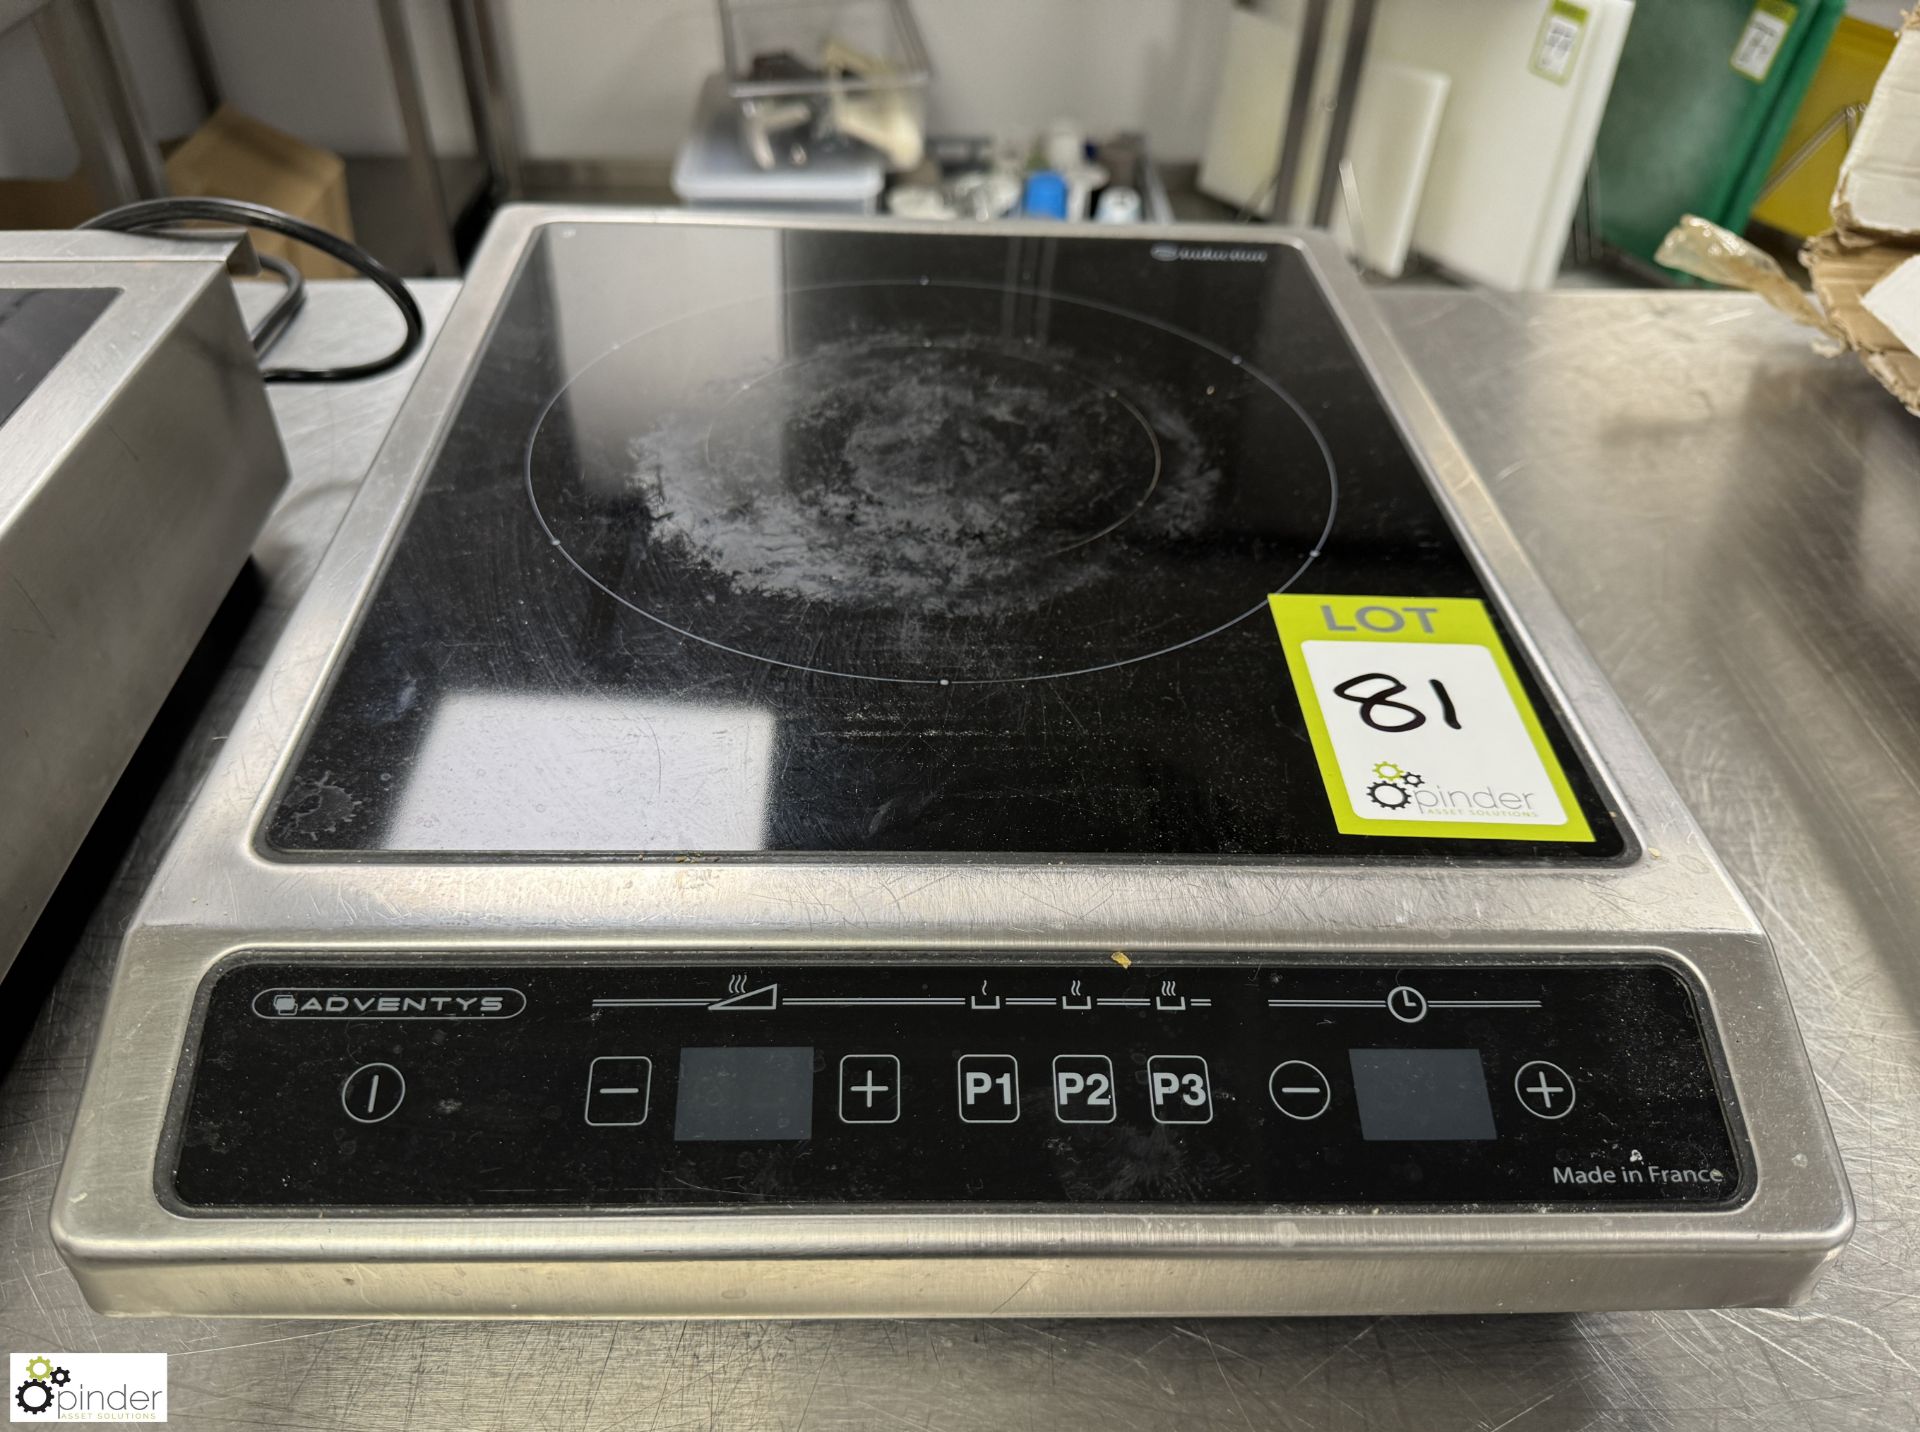 Adventys counter top Induction Hob, 240volts (location in building – basement kitchen 2) - Image 2 of 4